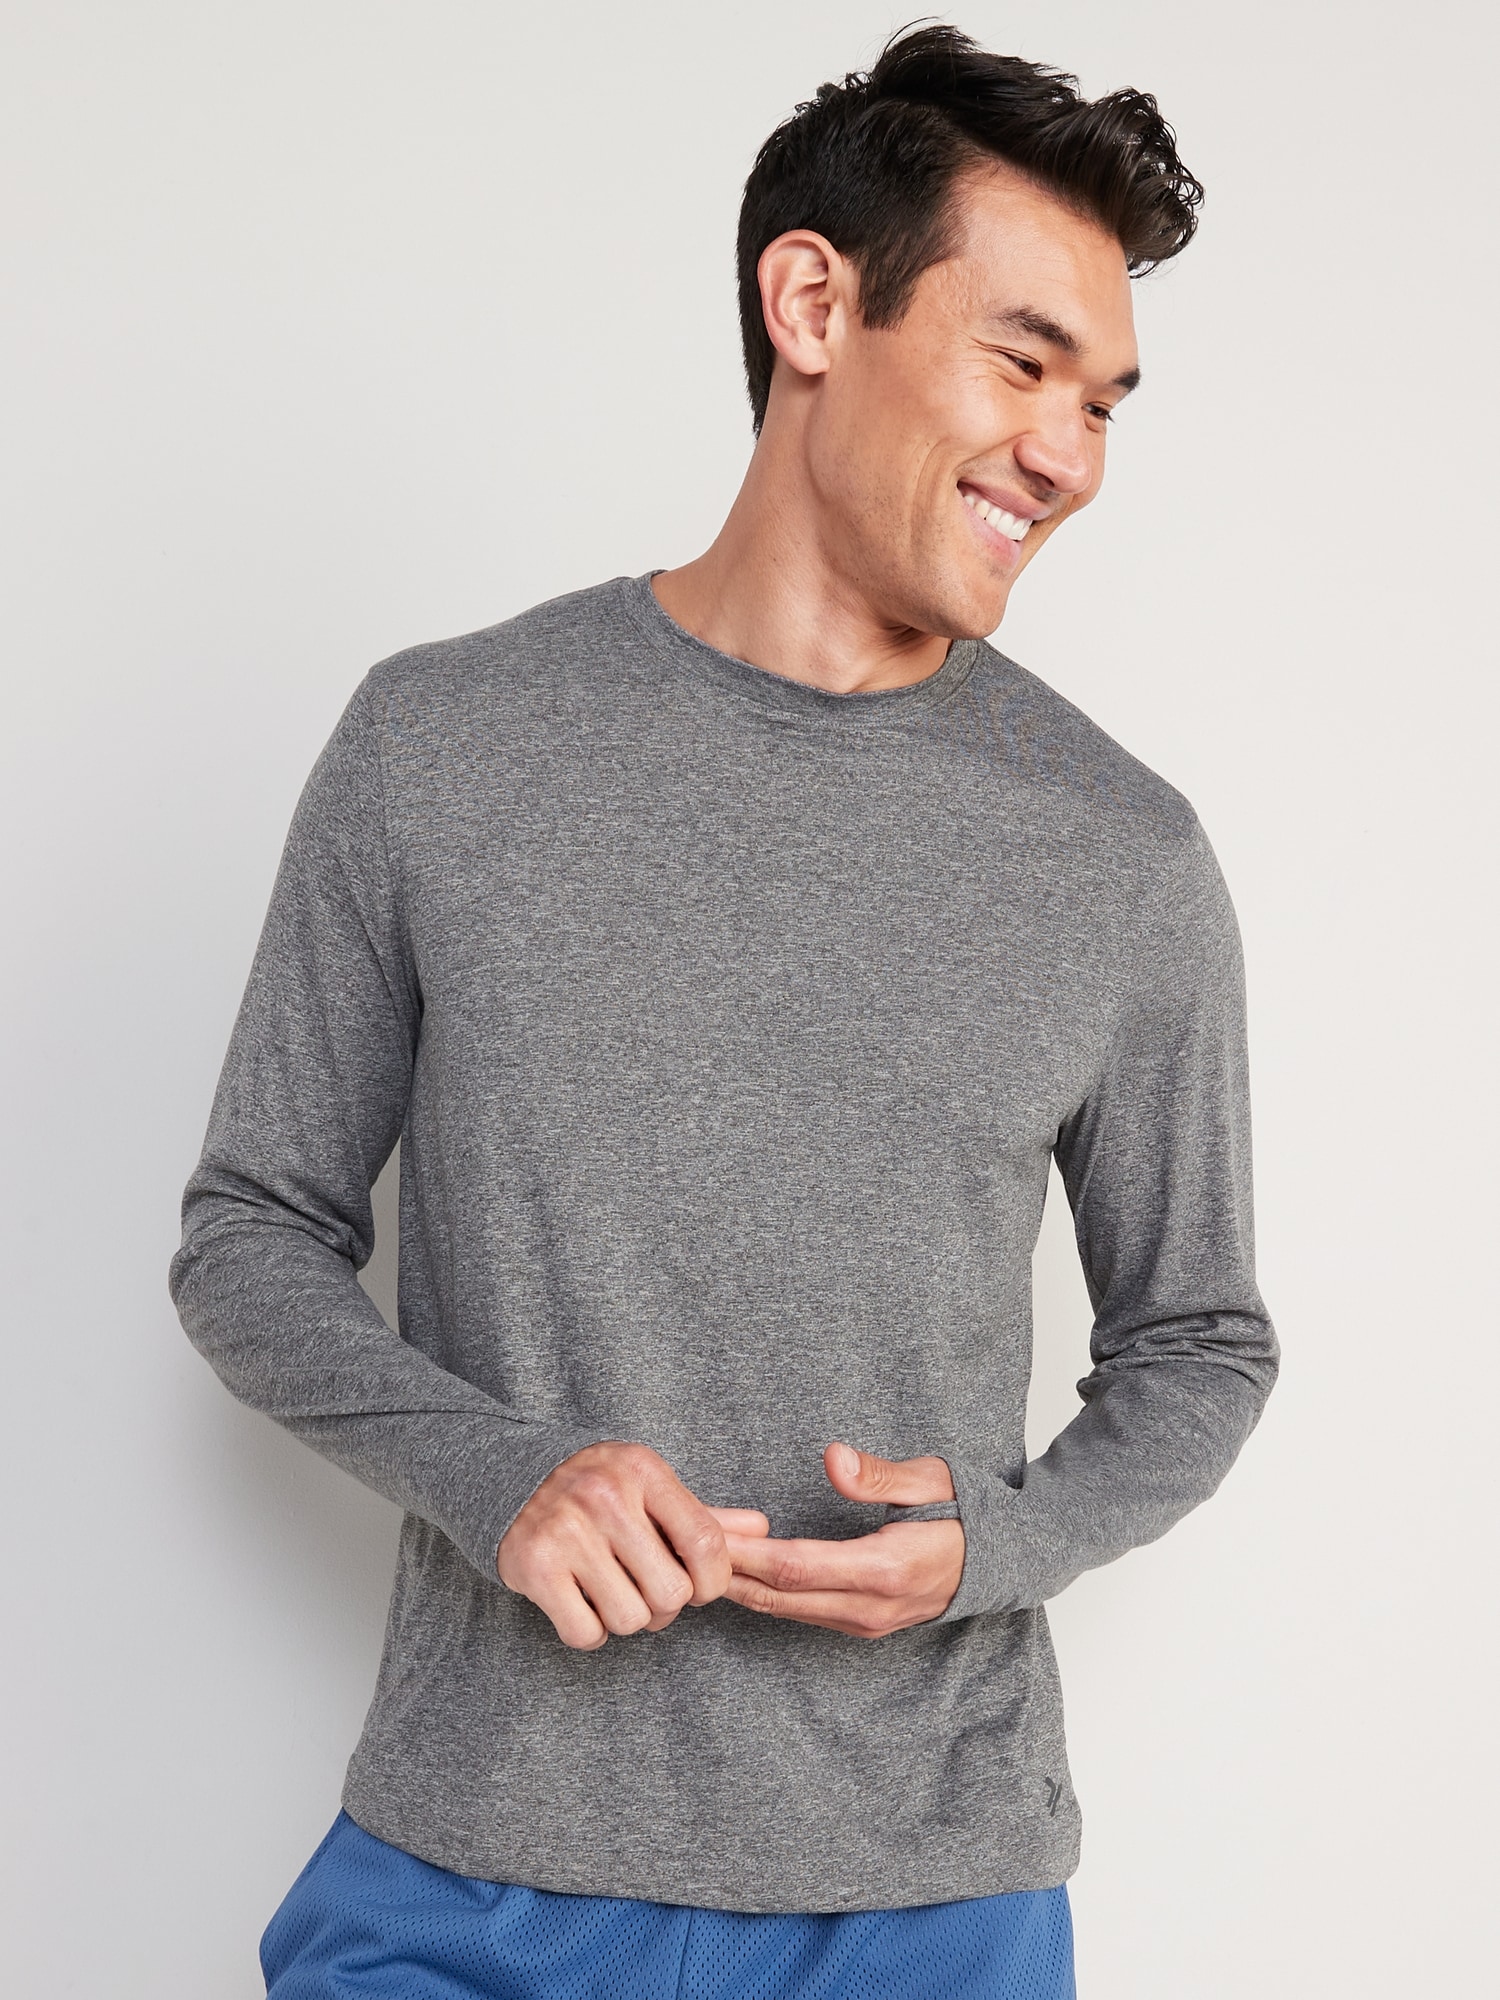 Go-Dry Cool Odor-Control Core Long-Sleeve T-Shirt 3-Pack for Men | Old Navy